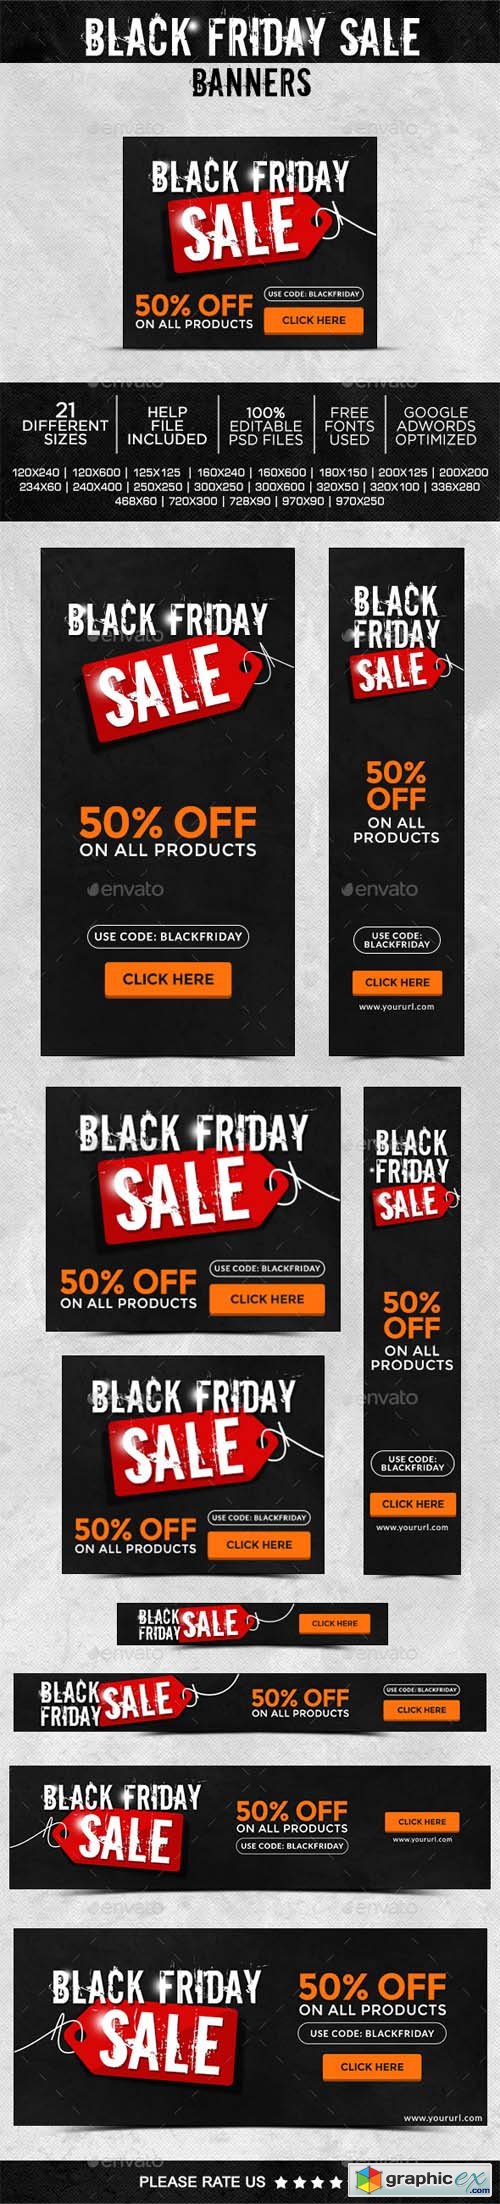 Black Friday Sale Banners 9541601